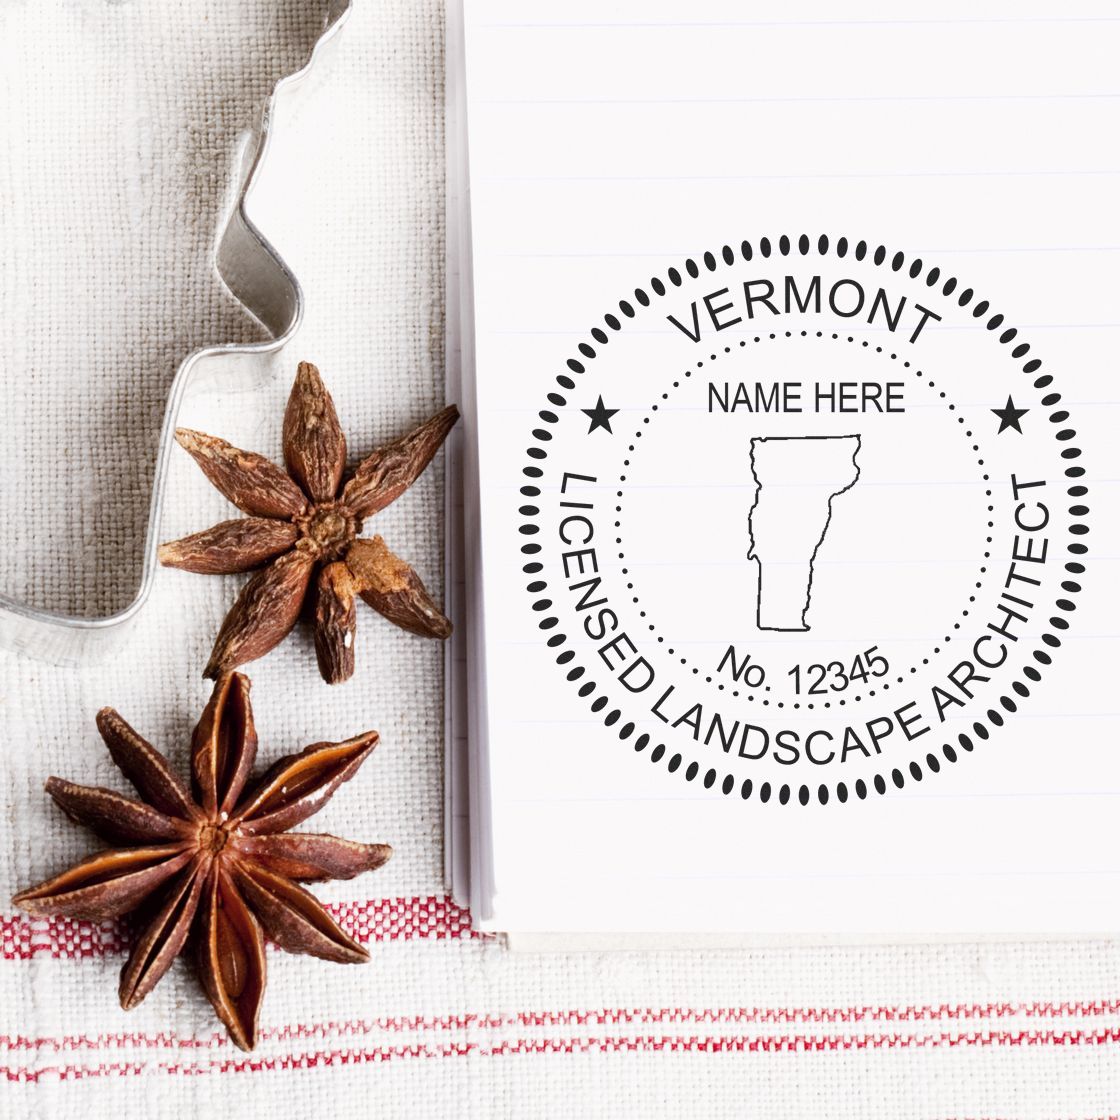 A stamped impression of the Digital Vermont Landscape Architect Stamp in this stylish lifestyle photo, setting the tone for a unique and personalized product.